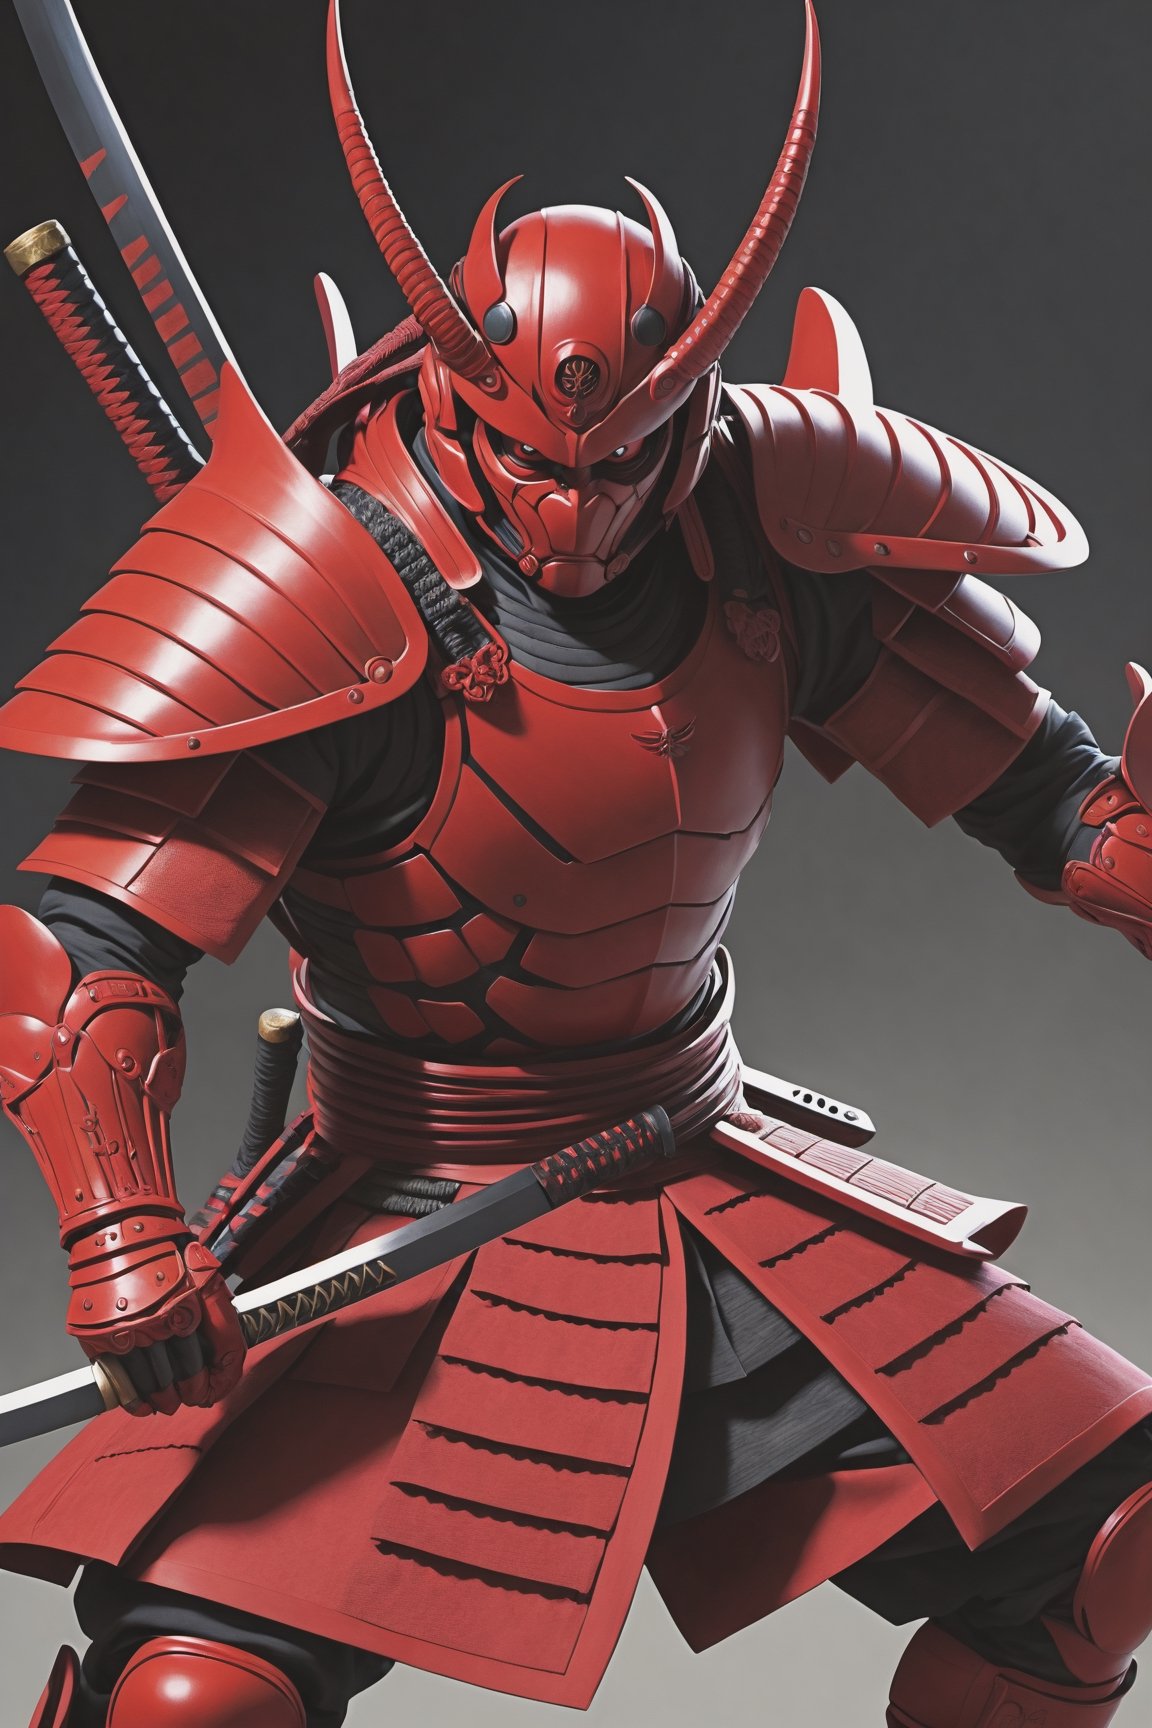 Utlrawide shot Photo realistic image a red samurai with strong body looking like a red hornet, highly detailed background,photo r3al